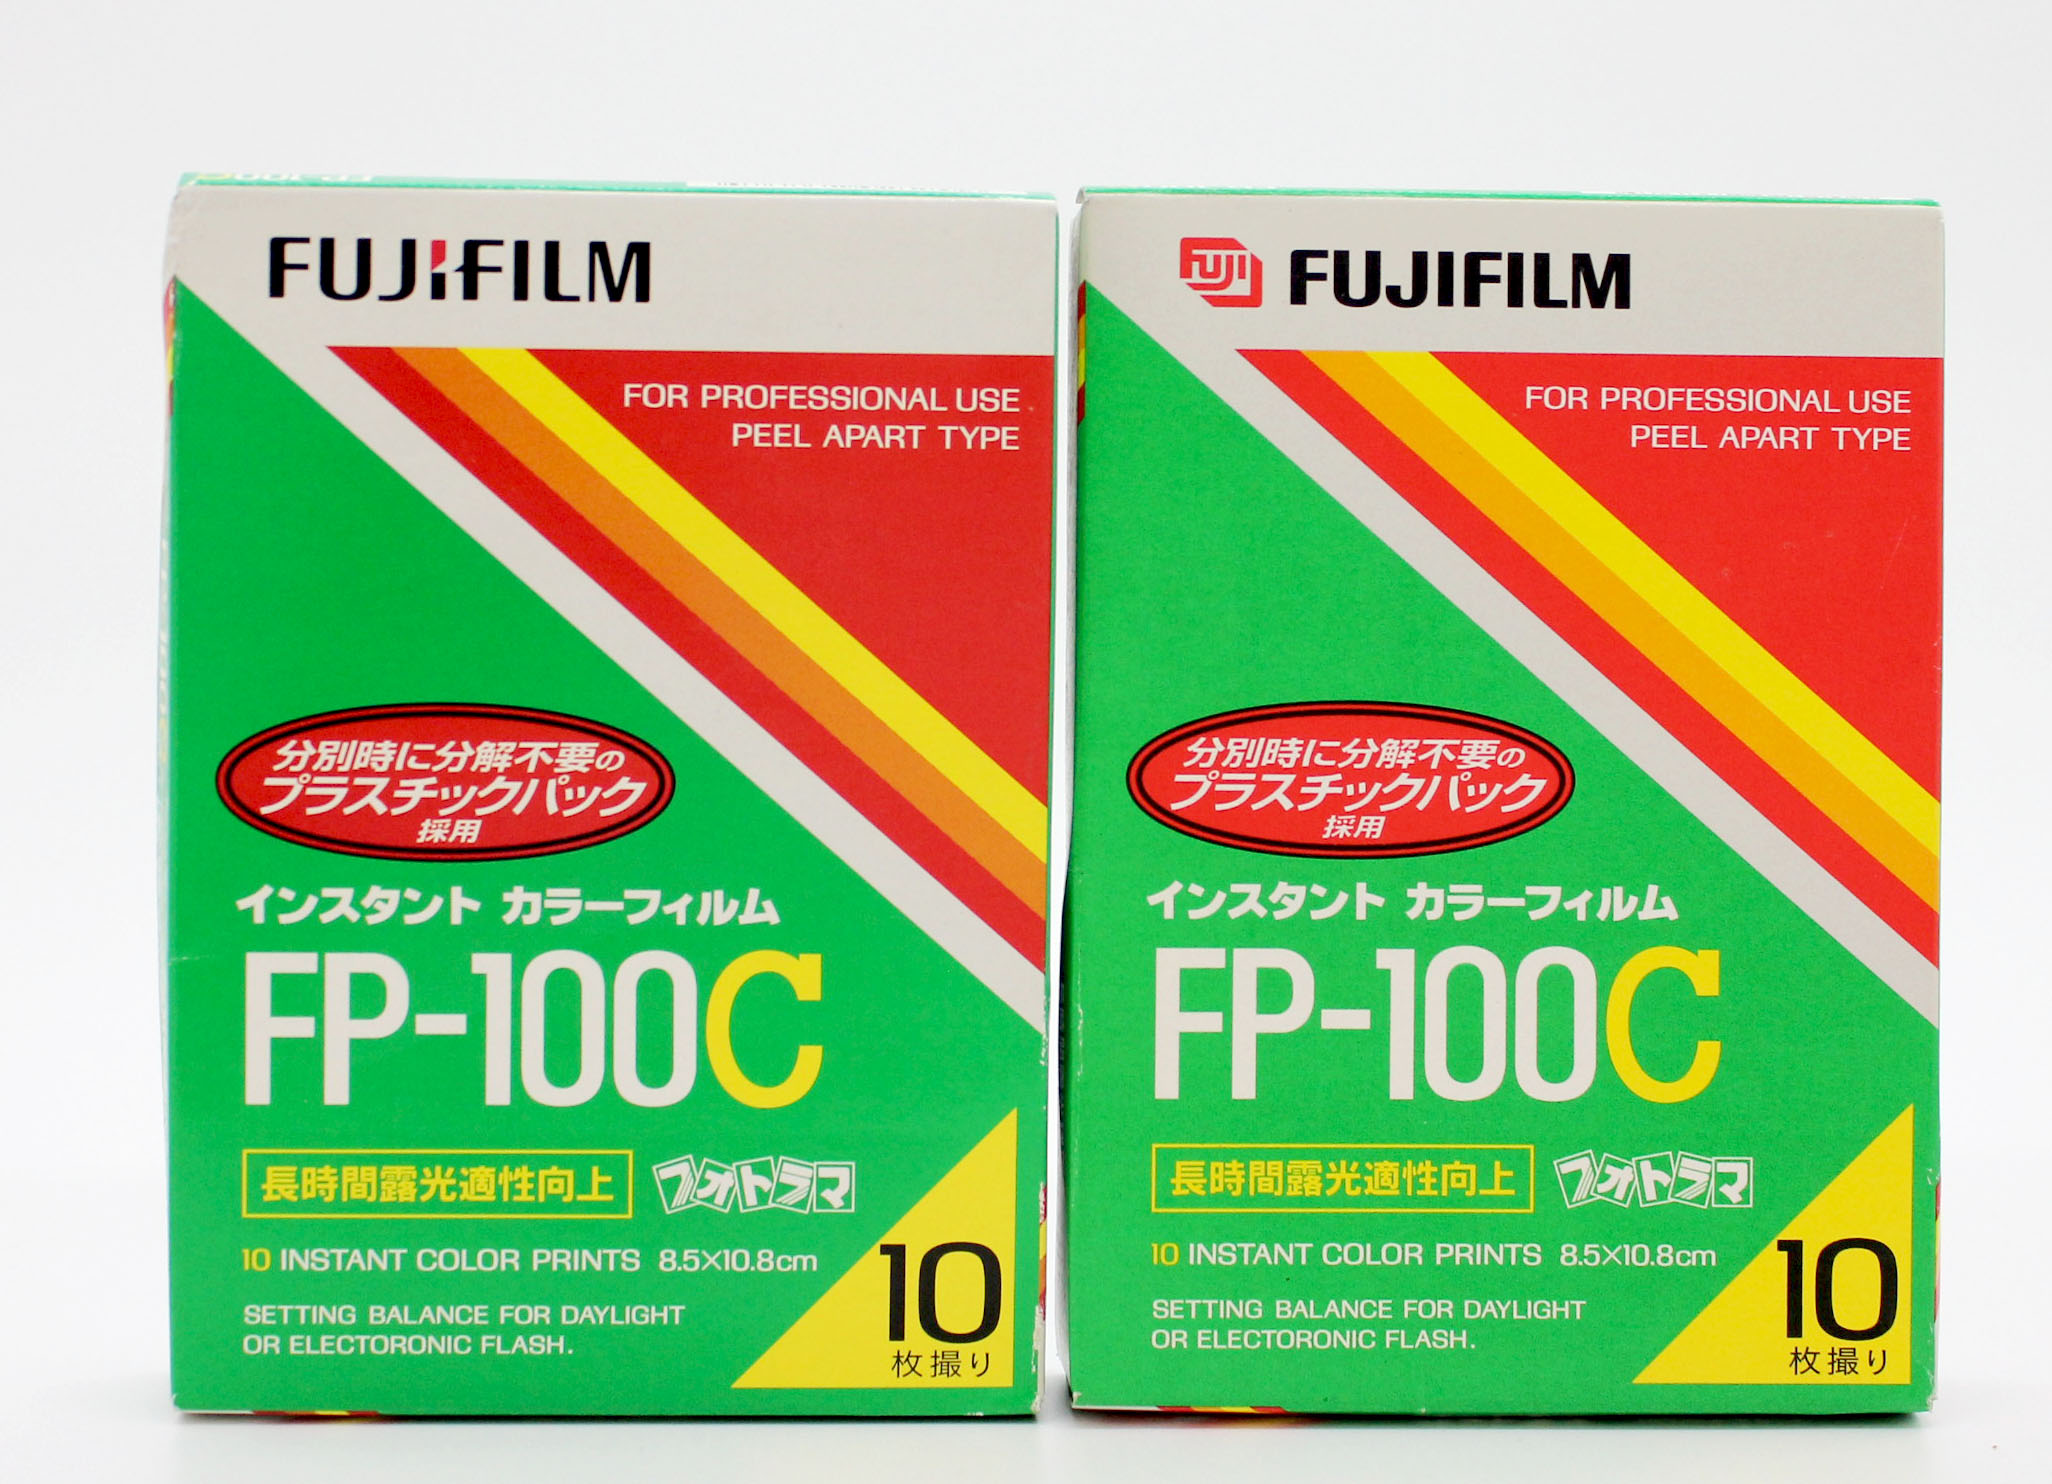 Japan Used Camera Shop | [New] Fujifilm FP-100C Instant Color Film Set of 2 (Expired) from Japan